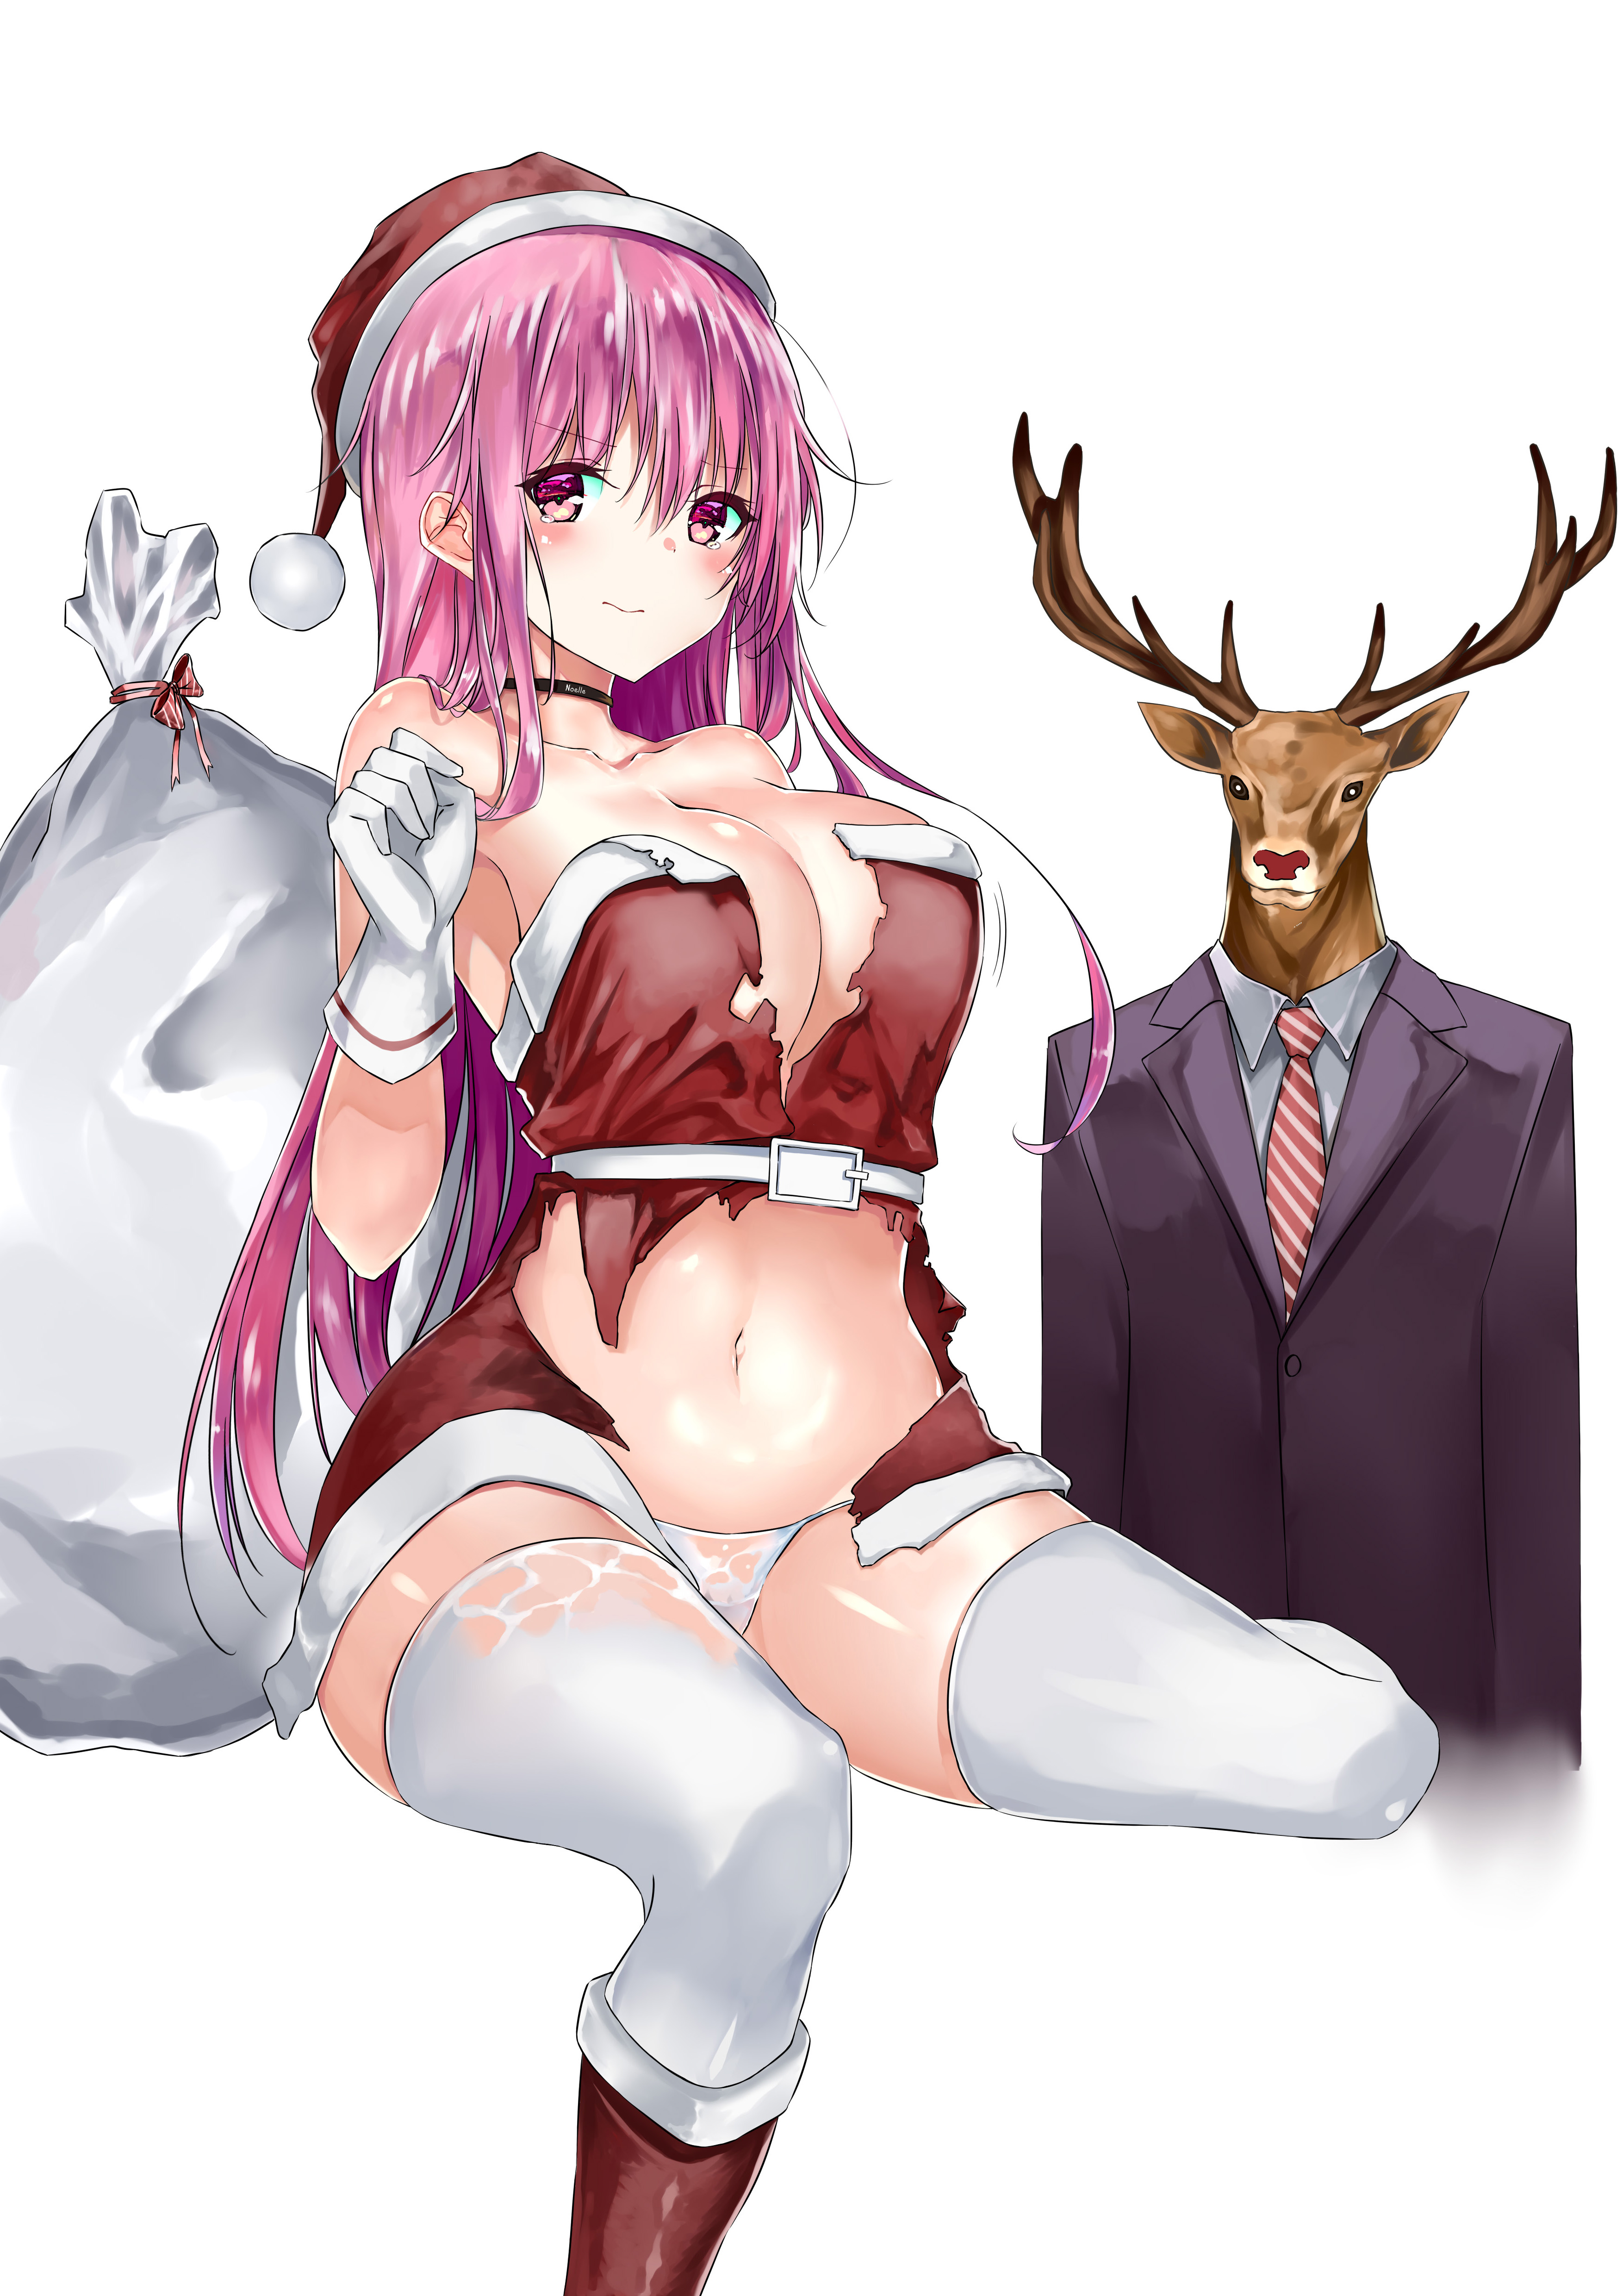 Anime 3507x4960 Christmas cleavage business suit no bra panties see-through clothing thigh-highs torn clothes wet clothing big boobs pink hair anime girls anime